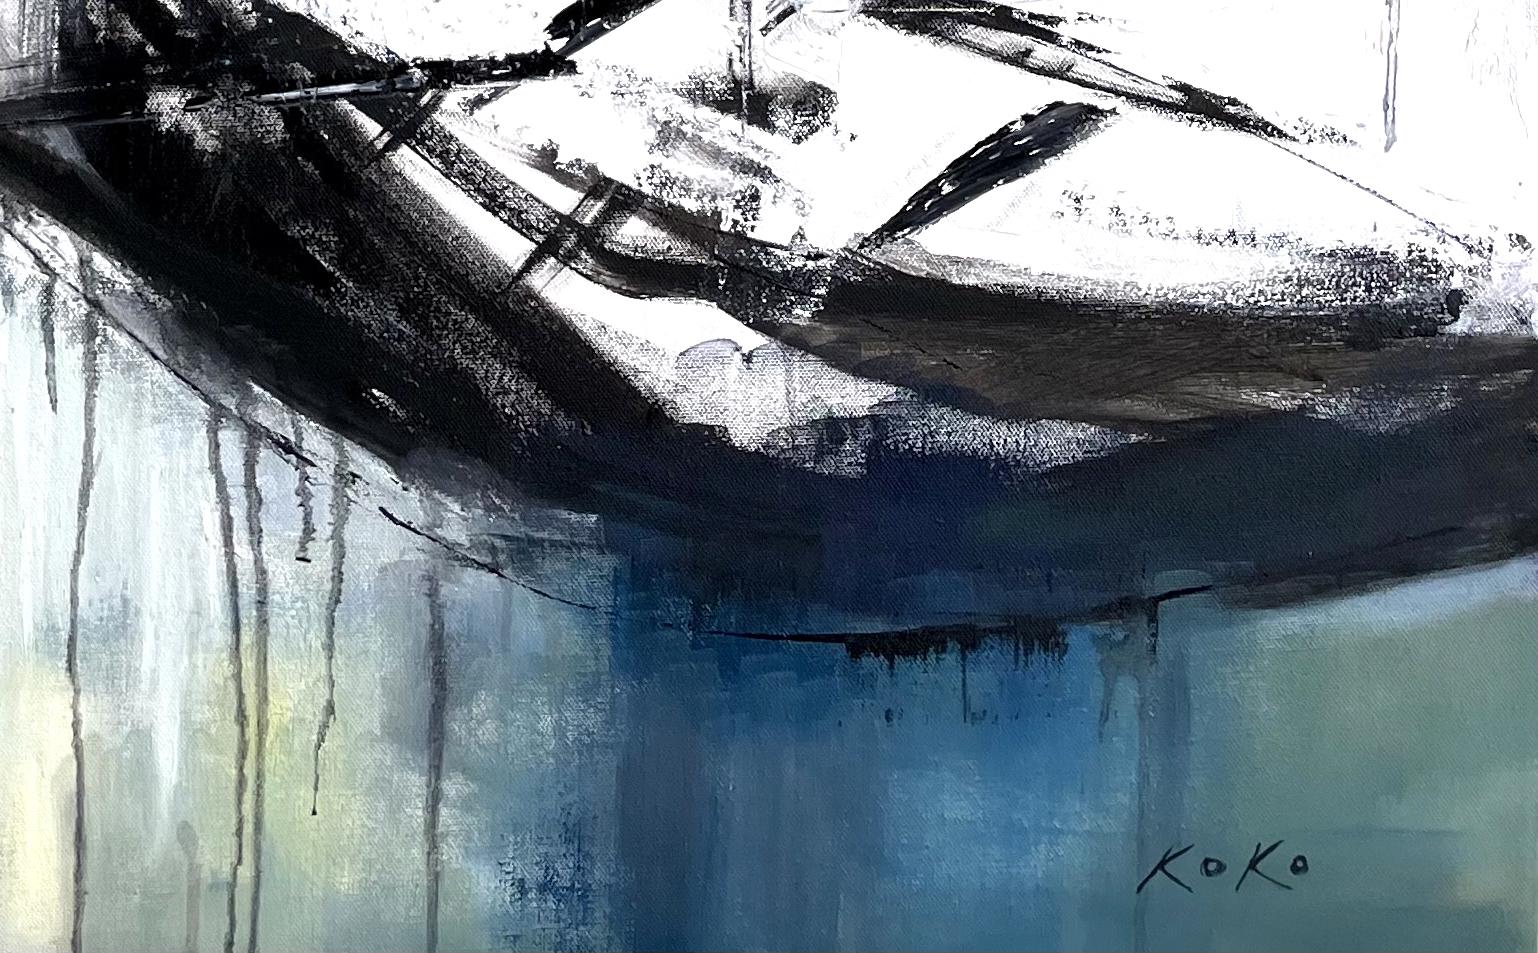 Sails at Coastal Town - Abstract Expressionist Painting by KOKO HOVAGUIMIAN